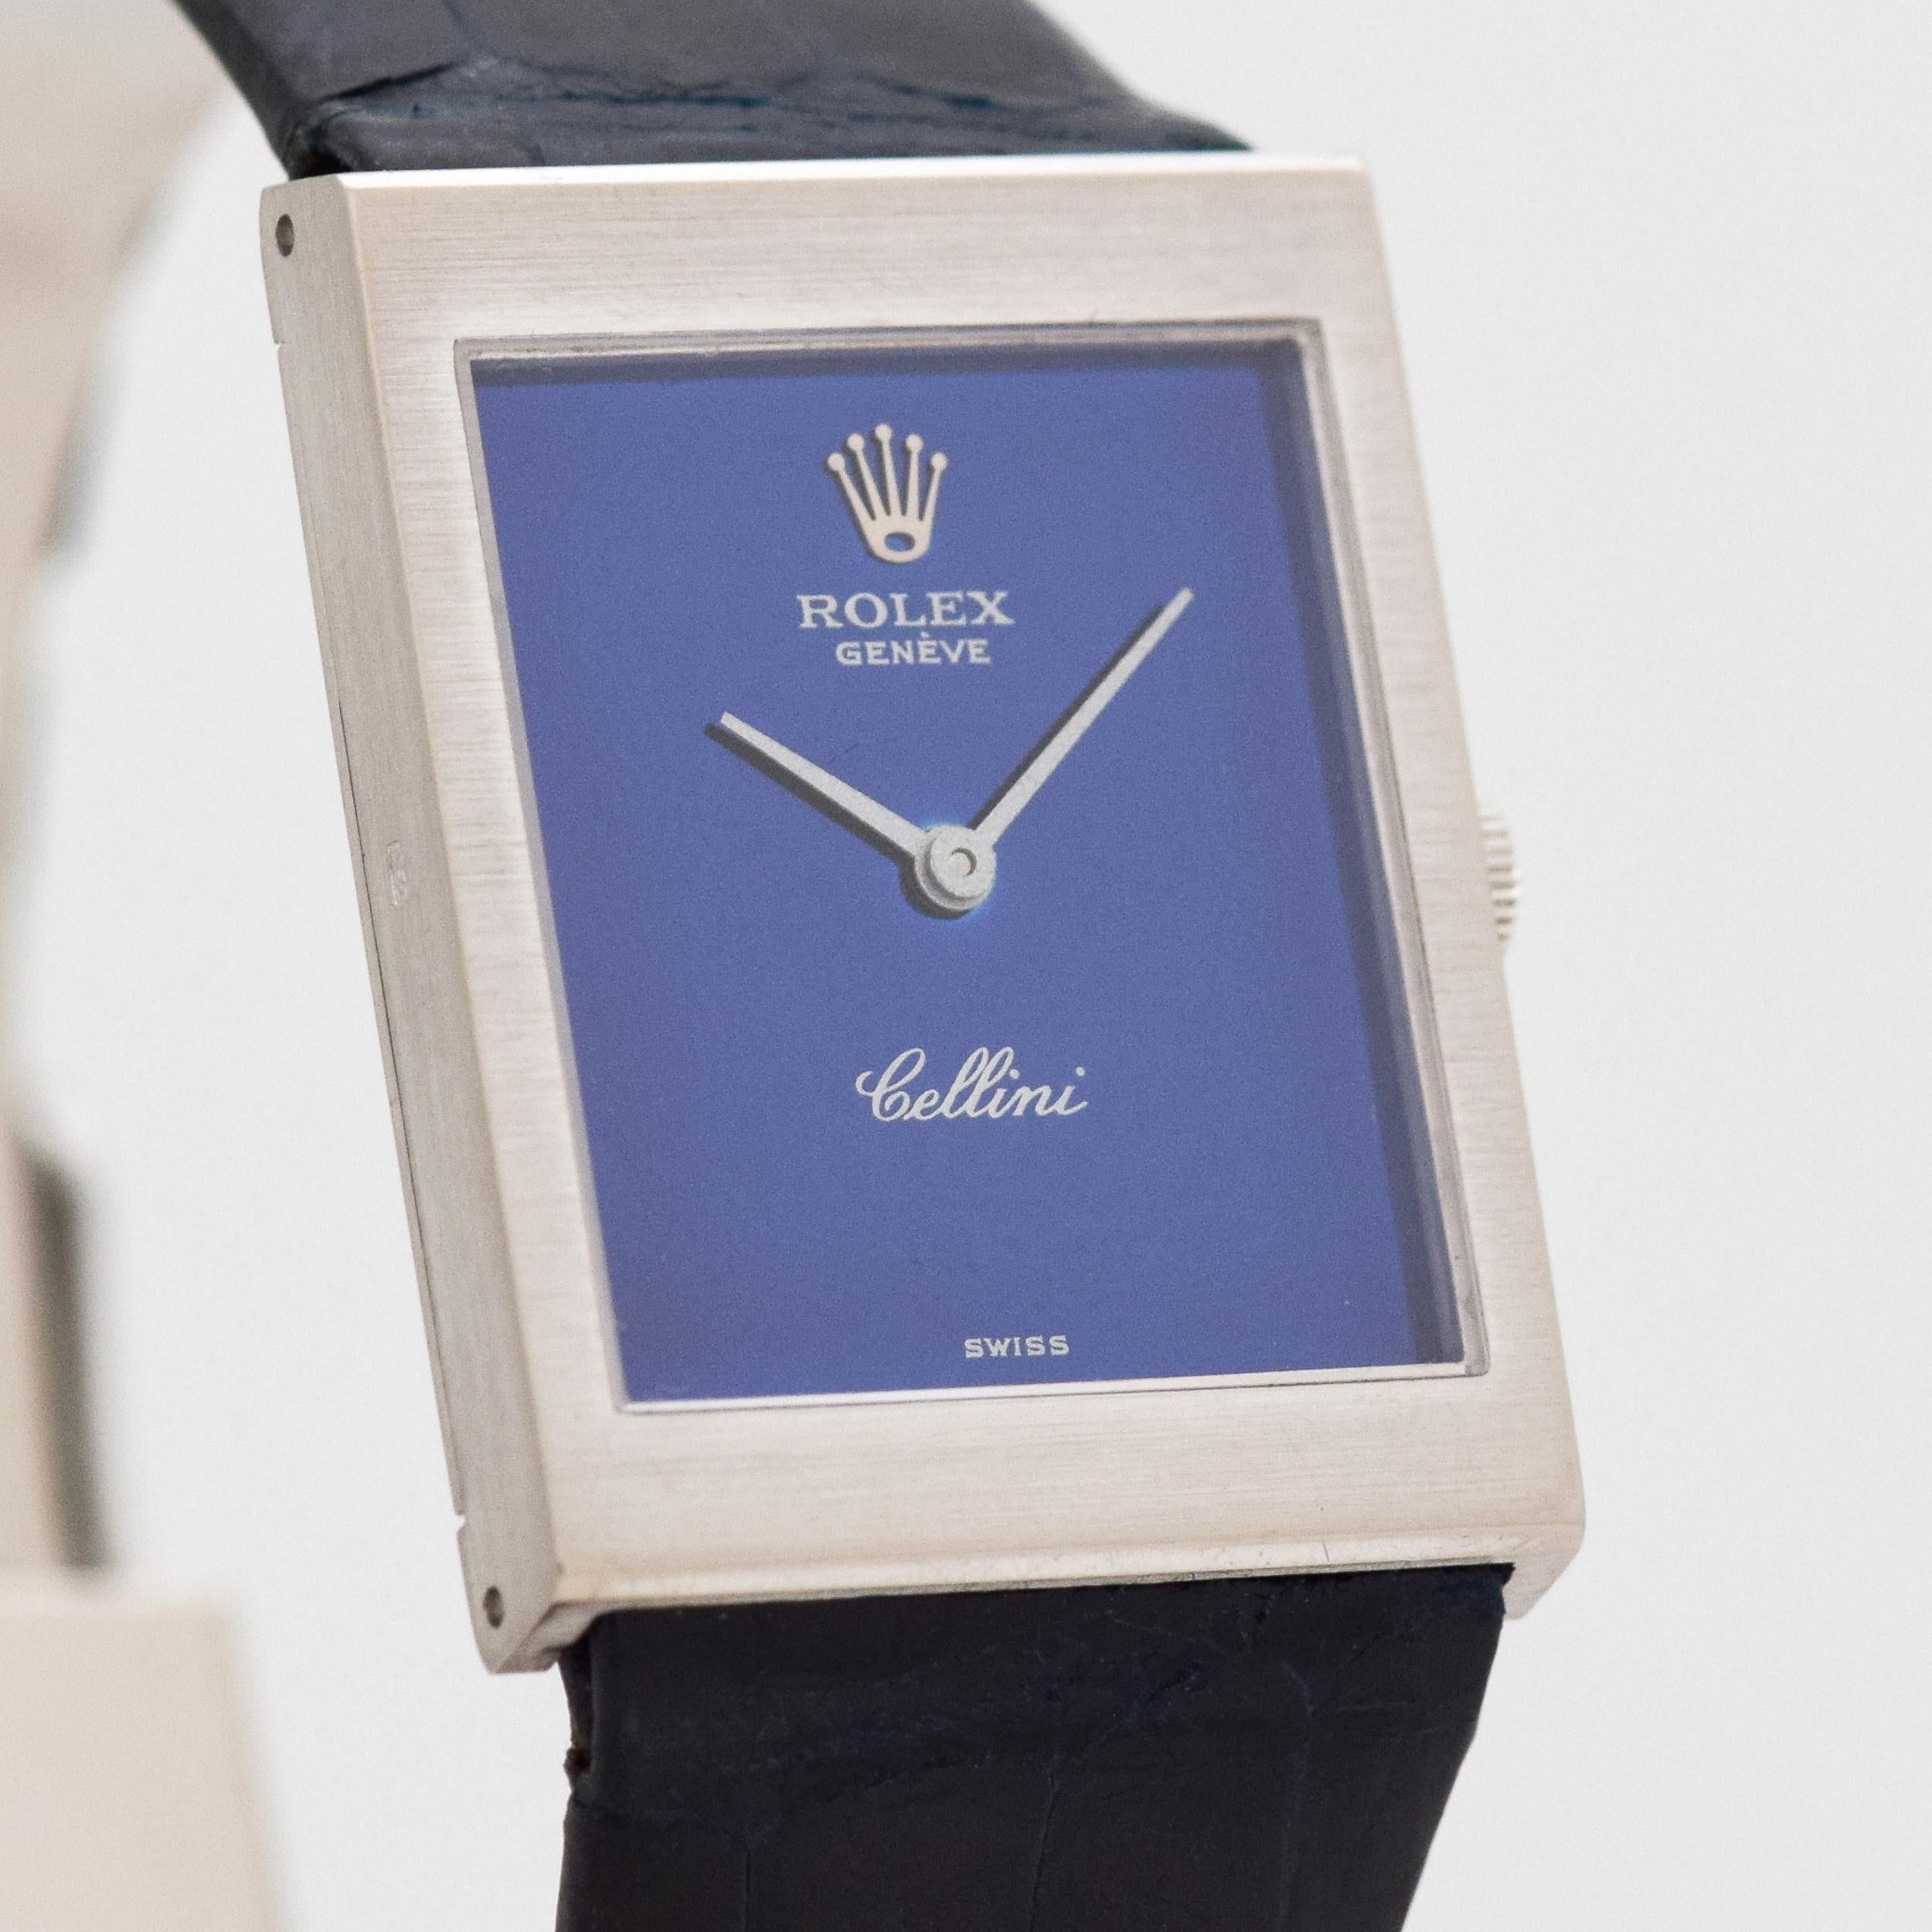 1973 Vintage Rolex Cellini 18k White Gold watch with Original Midnight Blue Dial with Original Rolex Crocodile Strap and Rolex Steel Buckle. 22mm x 29mm lug to lug (0.87 in. x 1.14 in.) - 19 jewel, manual caliber 1600 movement. Triple Signed.